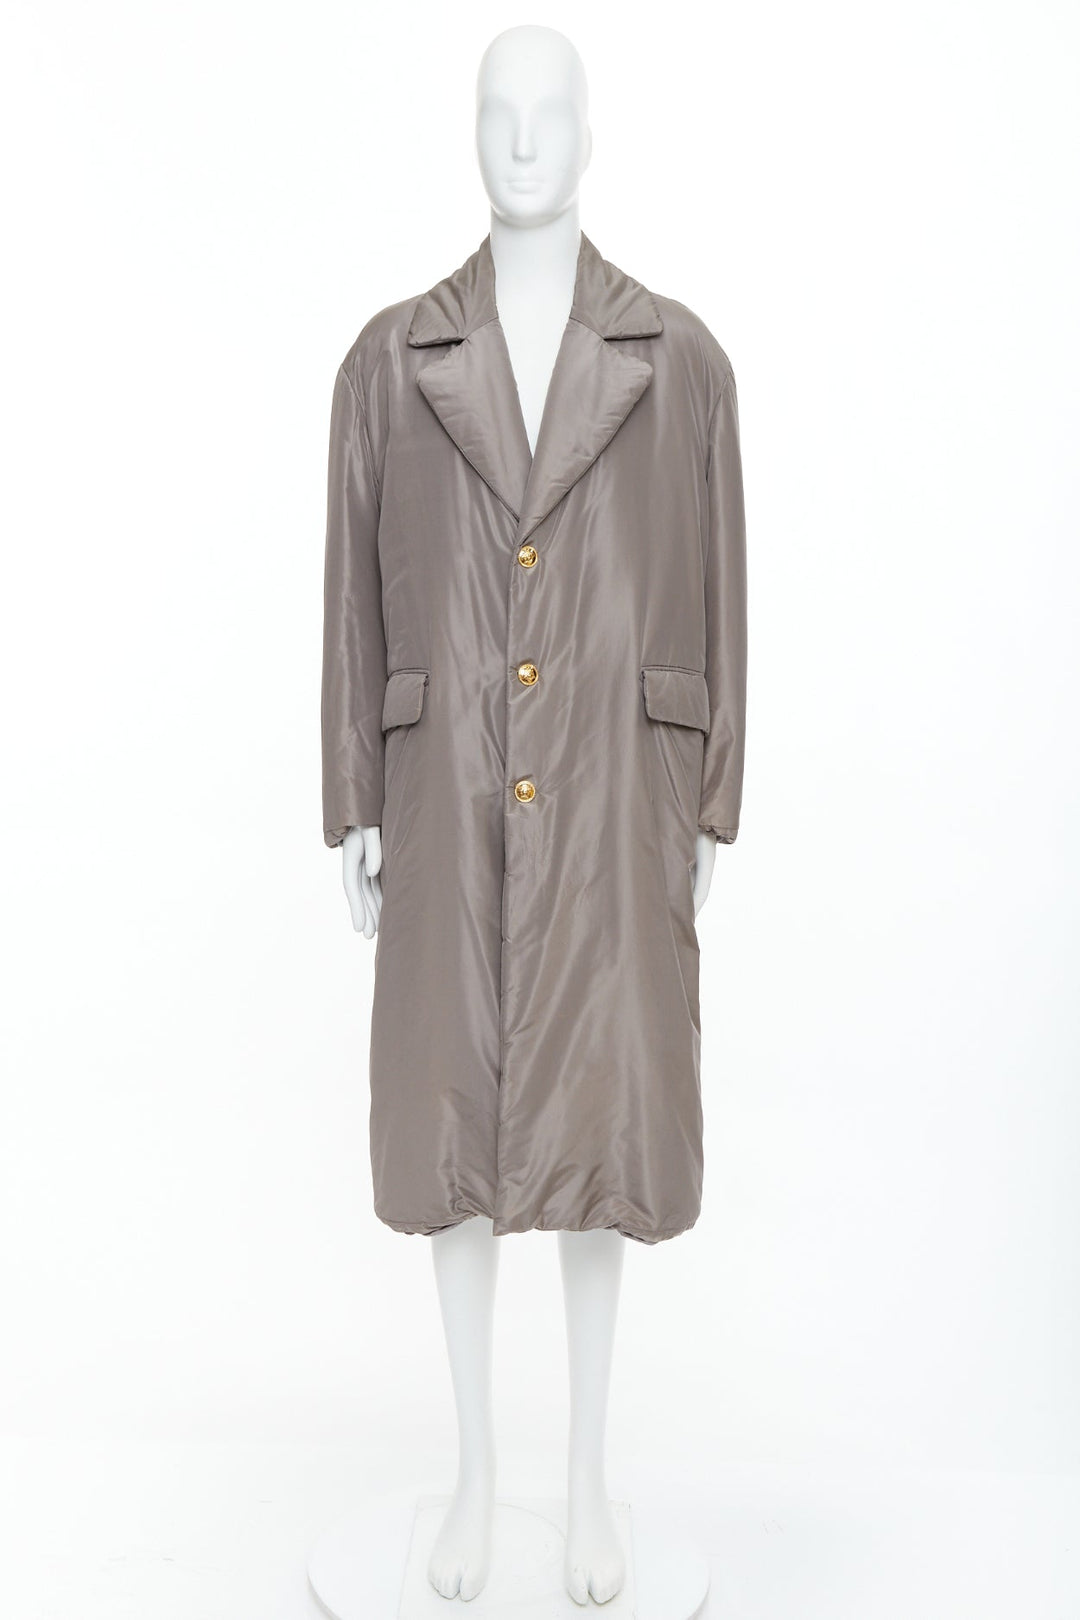 VERSACE 100% silk stone grey padded gold Medusa buttons long belted coat IT50 L